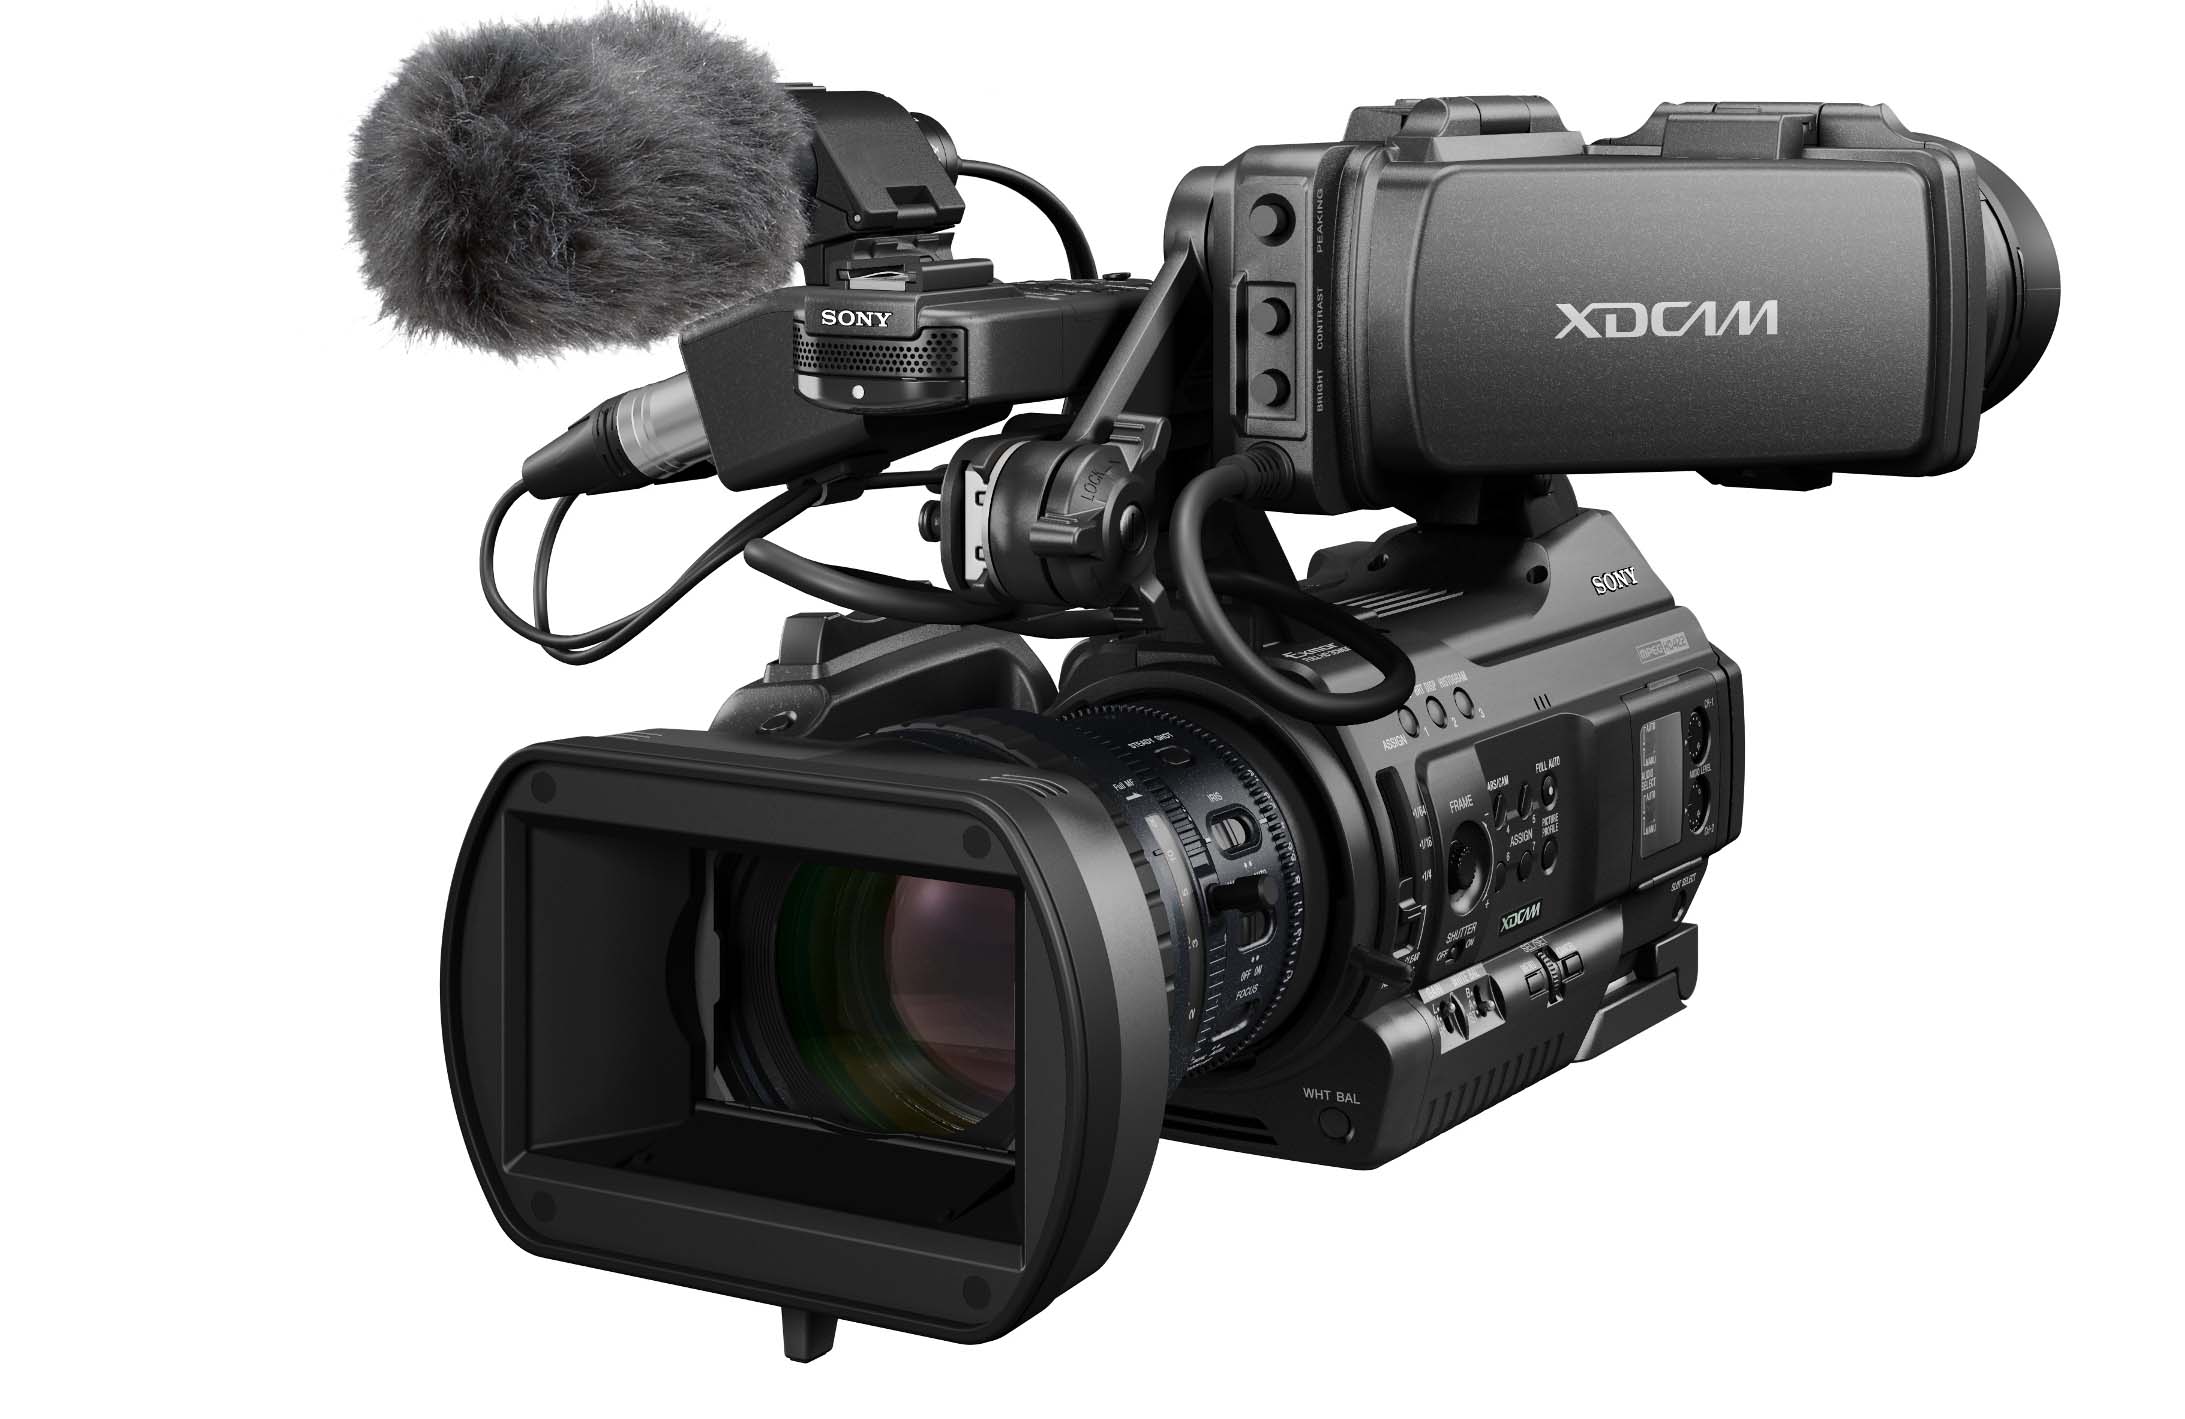 Sony introduces the PMW-300 semi-shoulder mount camcorder